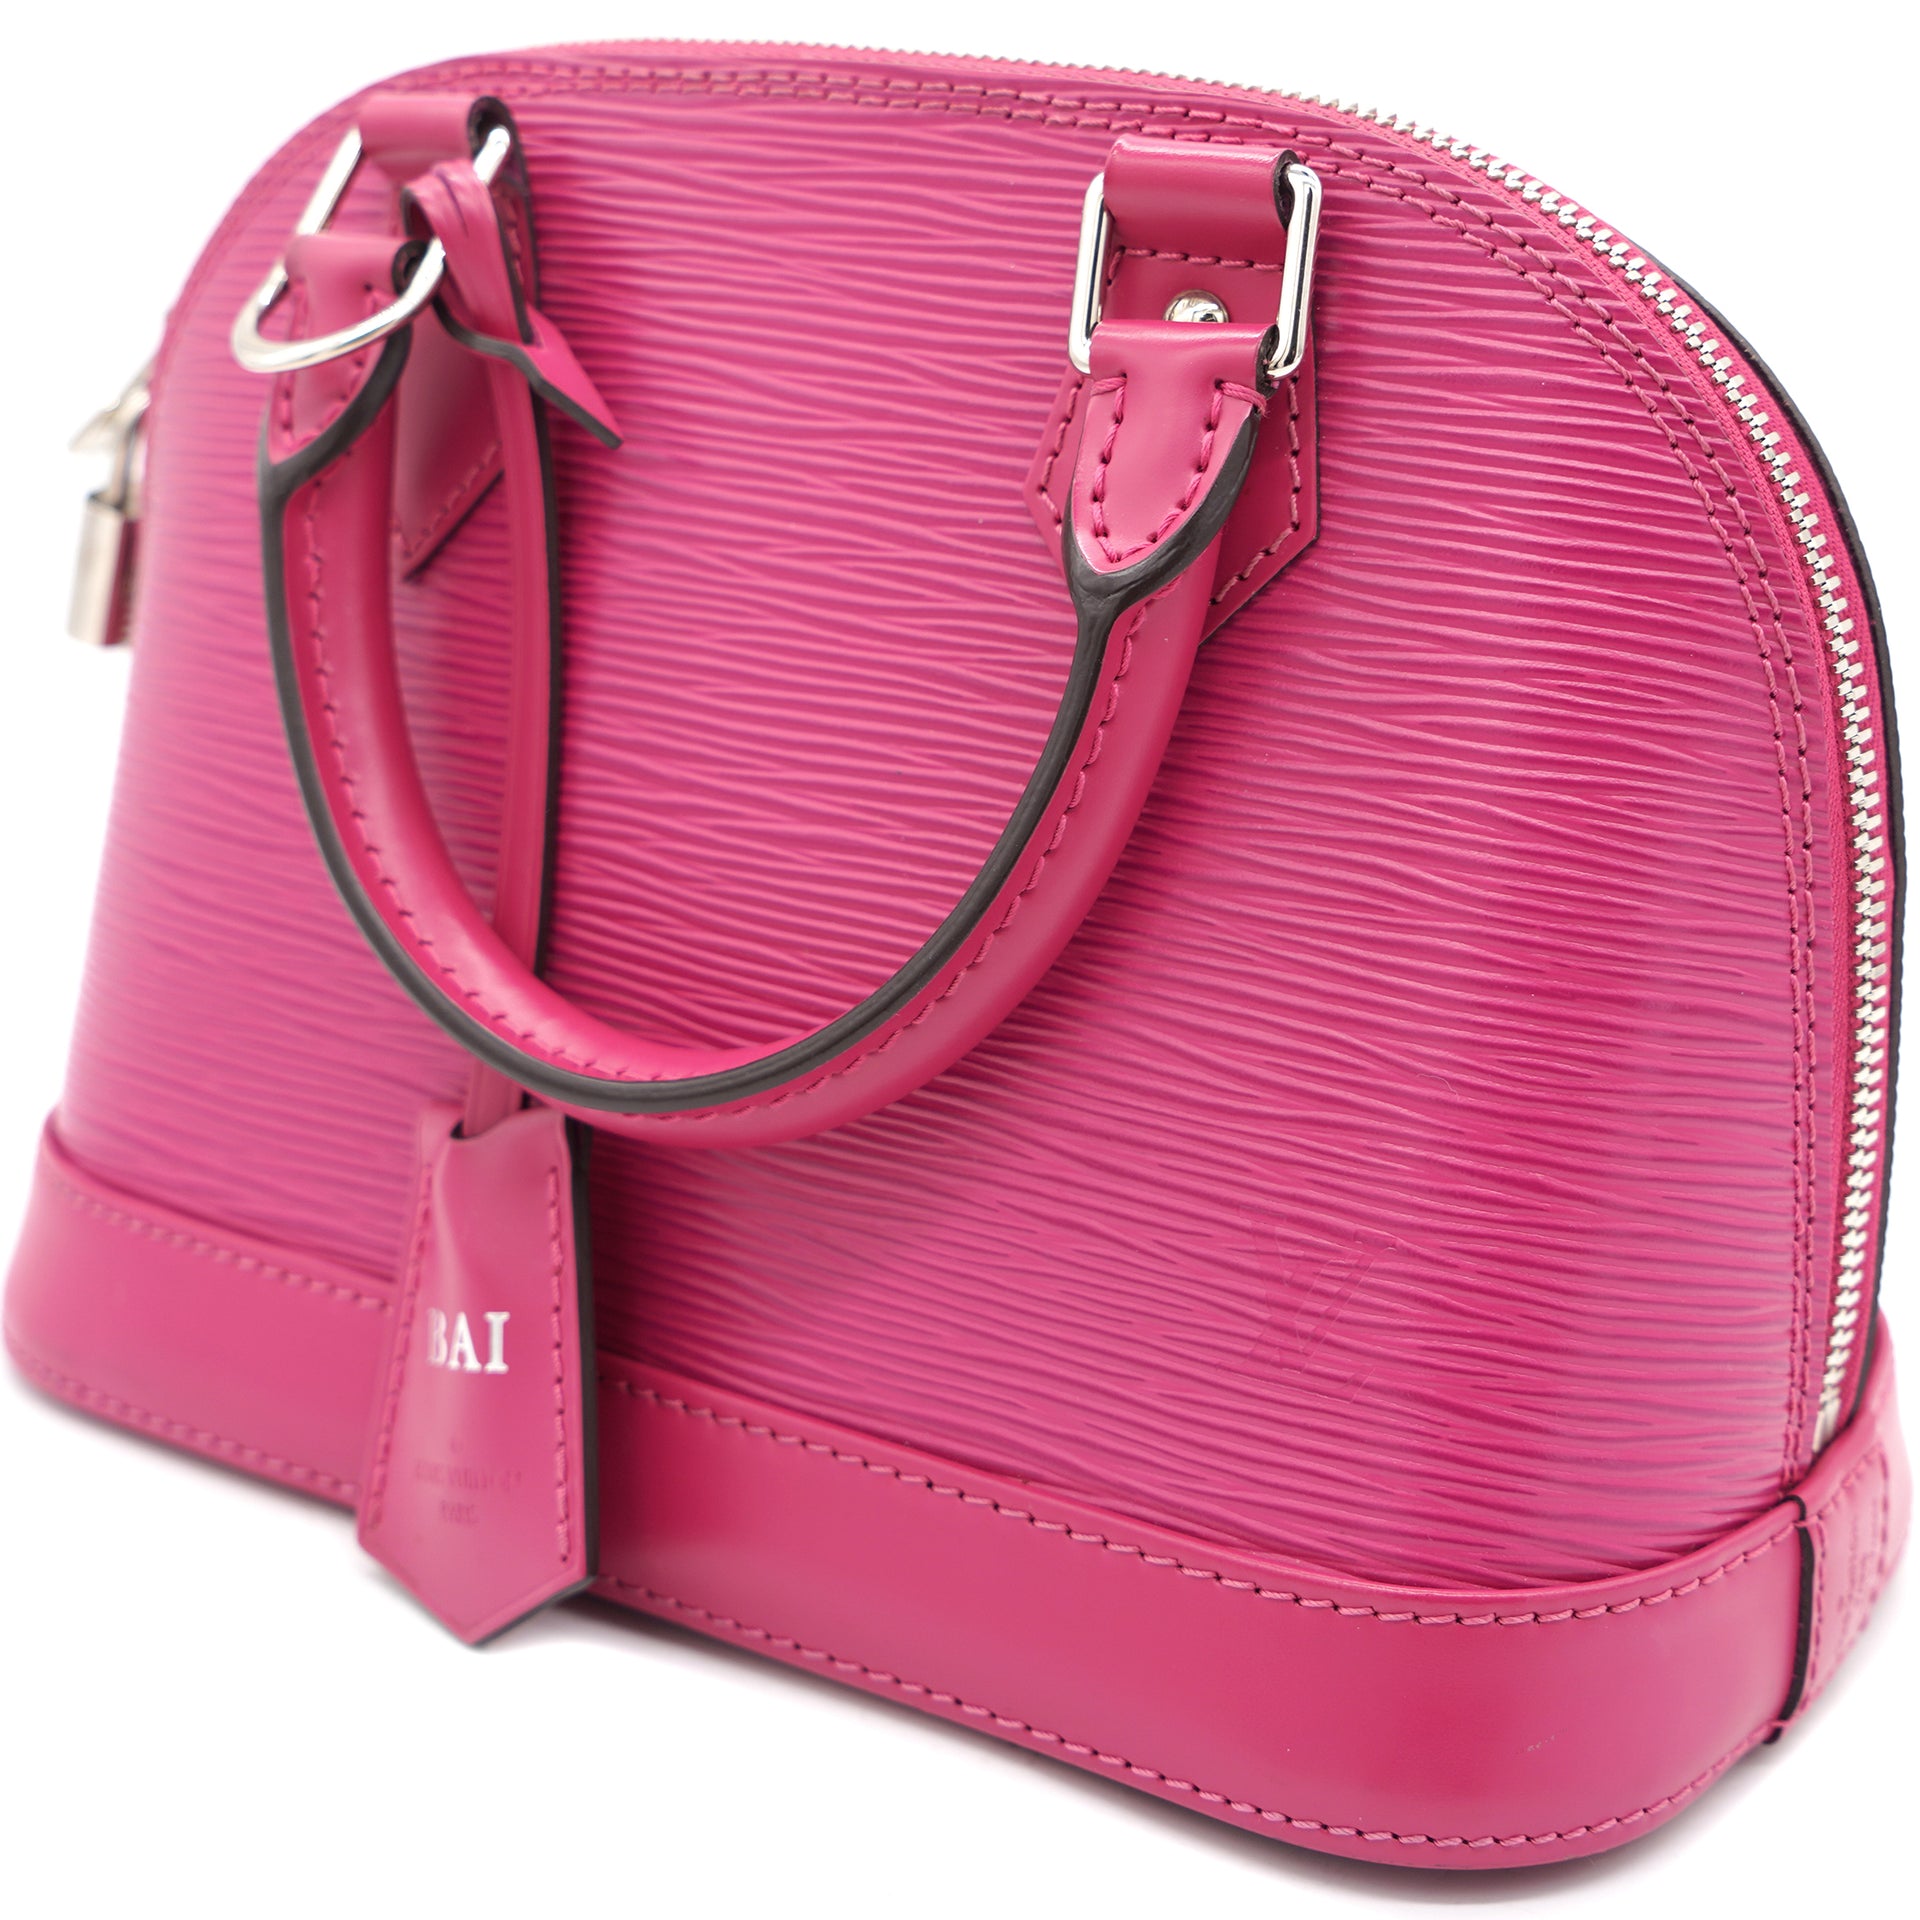 Alma bb leather handbag Louis Vuitton Pink in Leather - 32416310